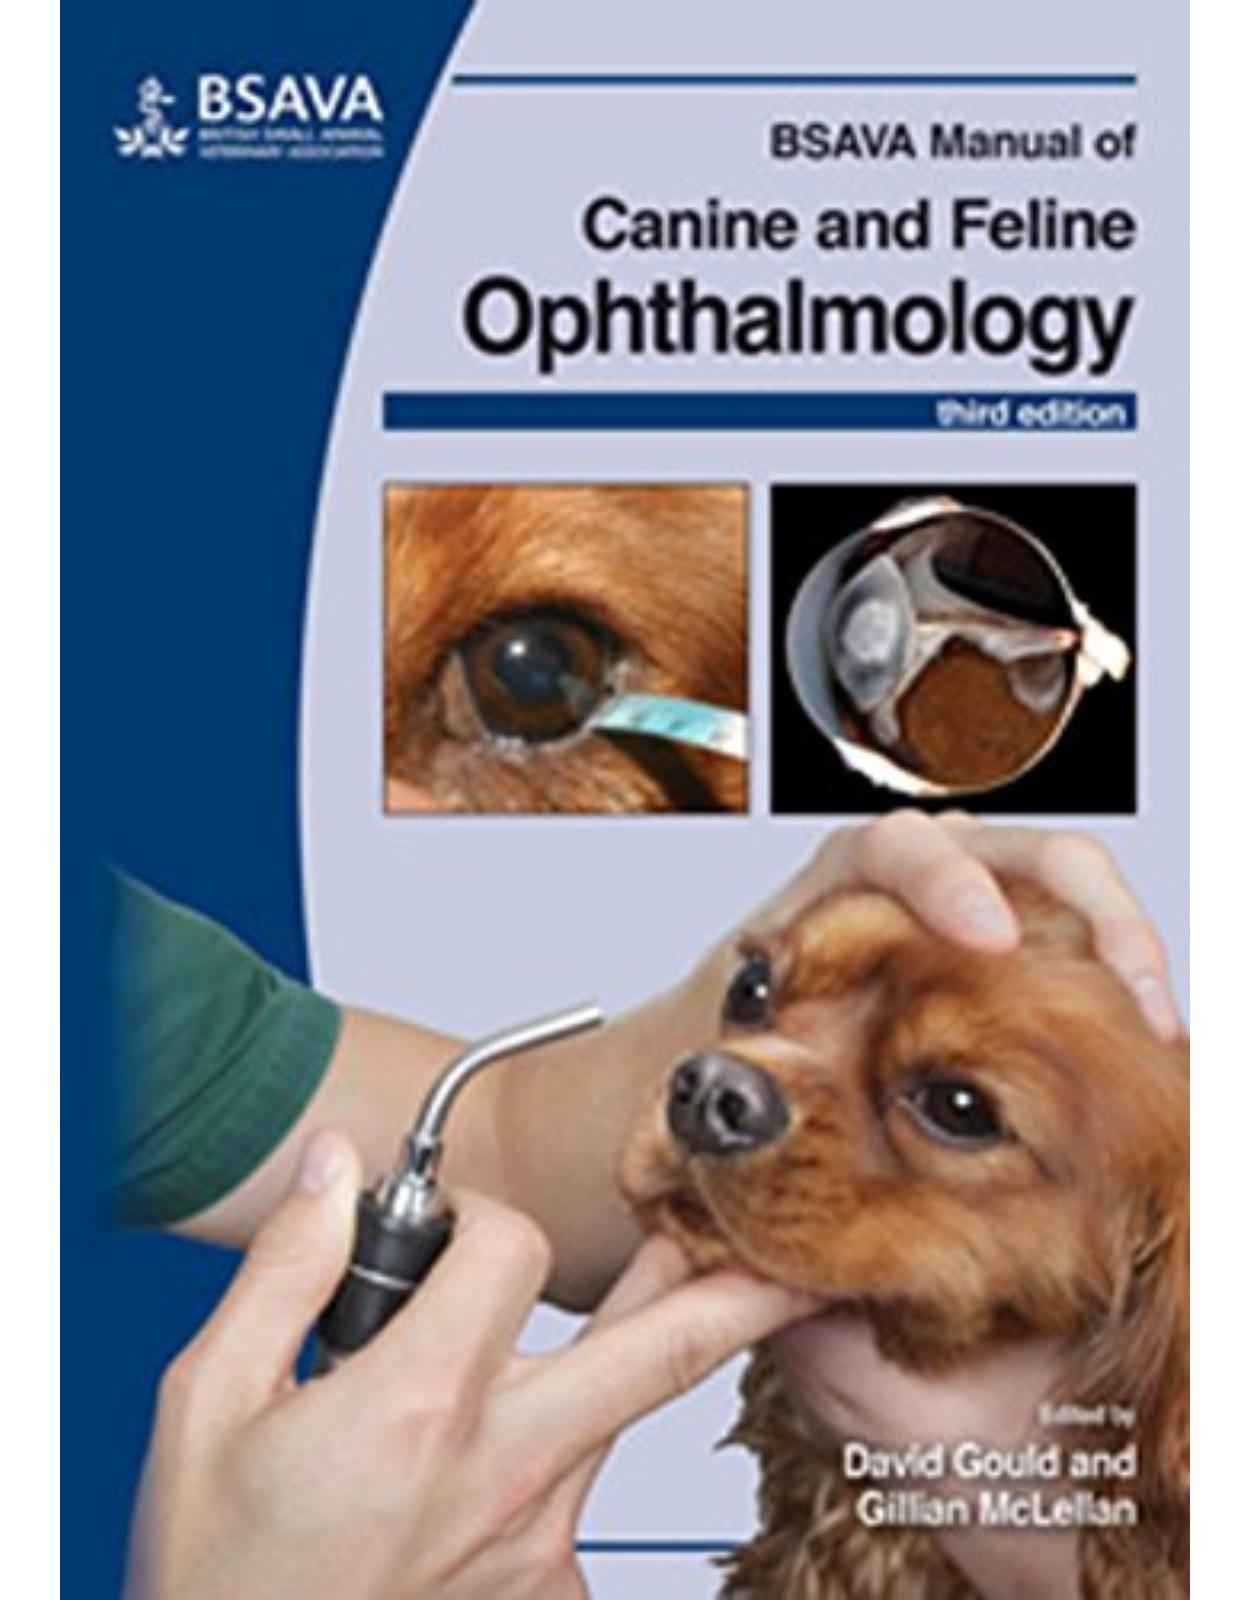 BSAVA Manual of Canine and Feline Ophthalmology 